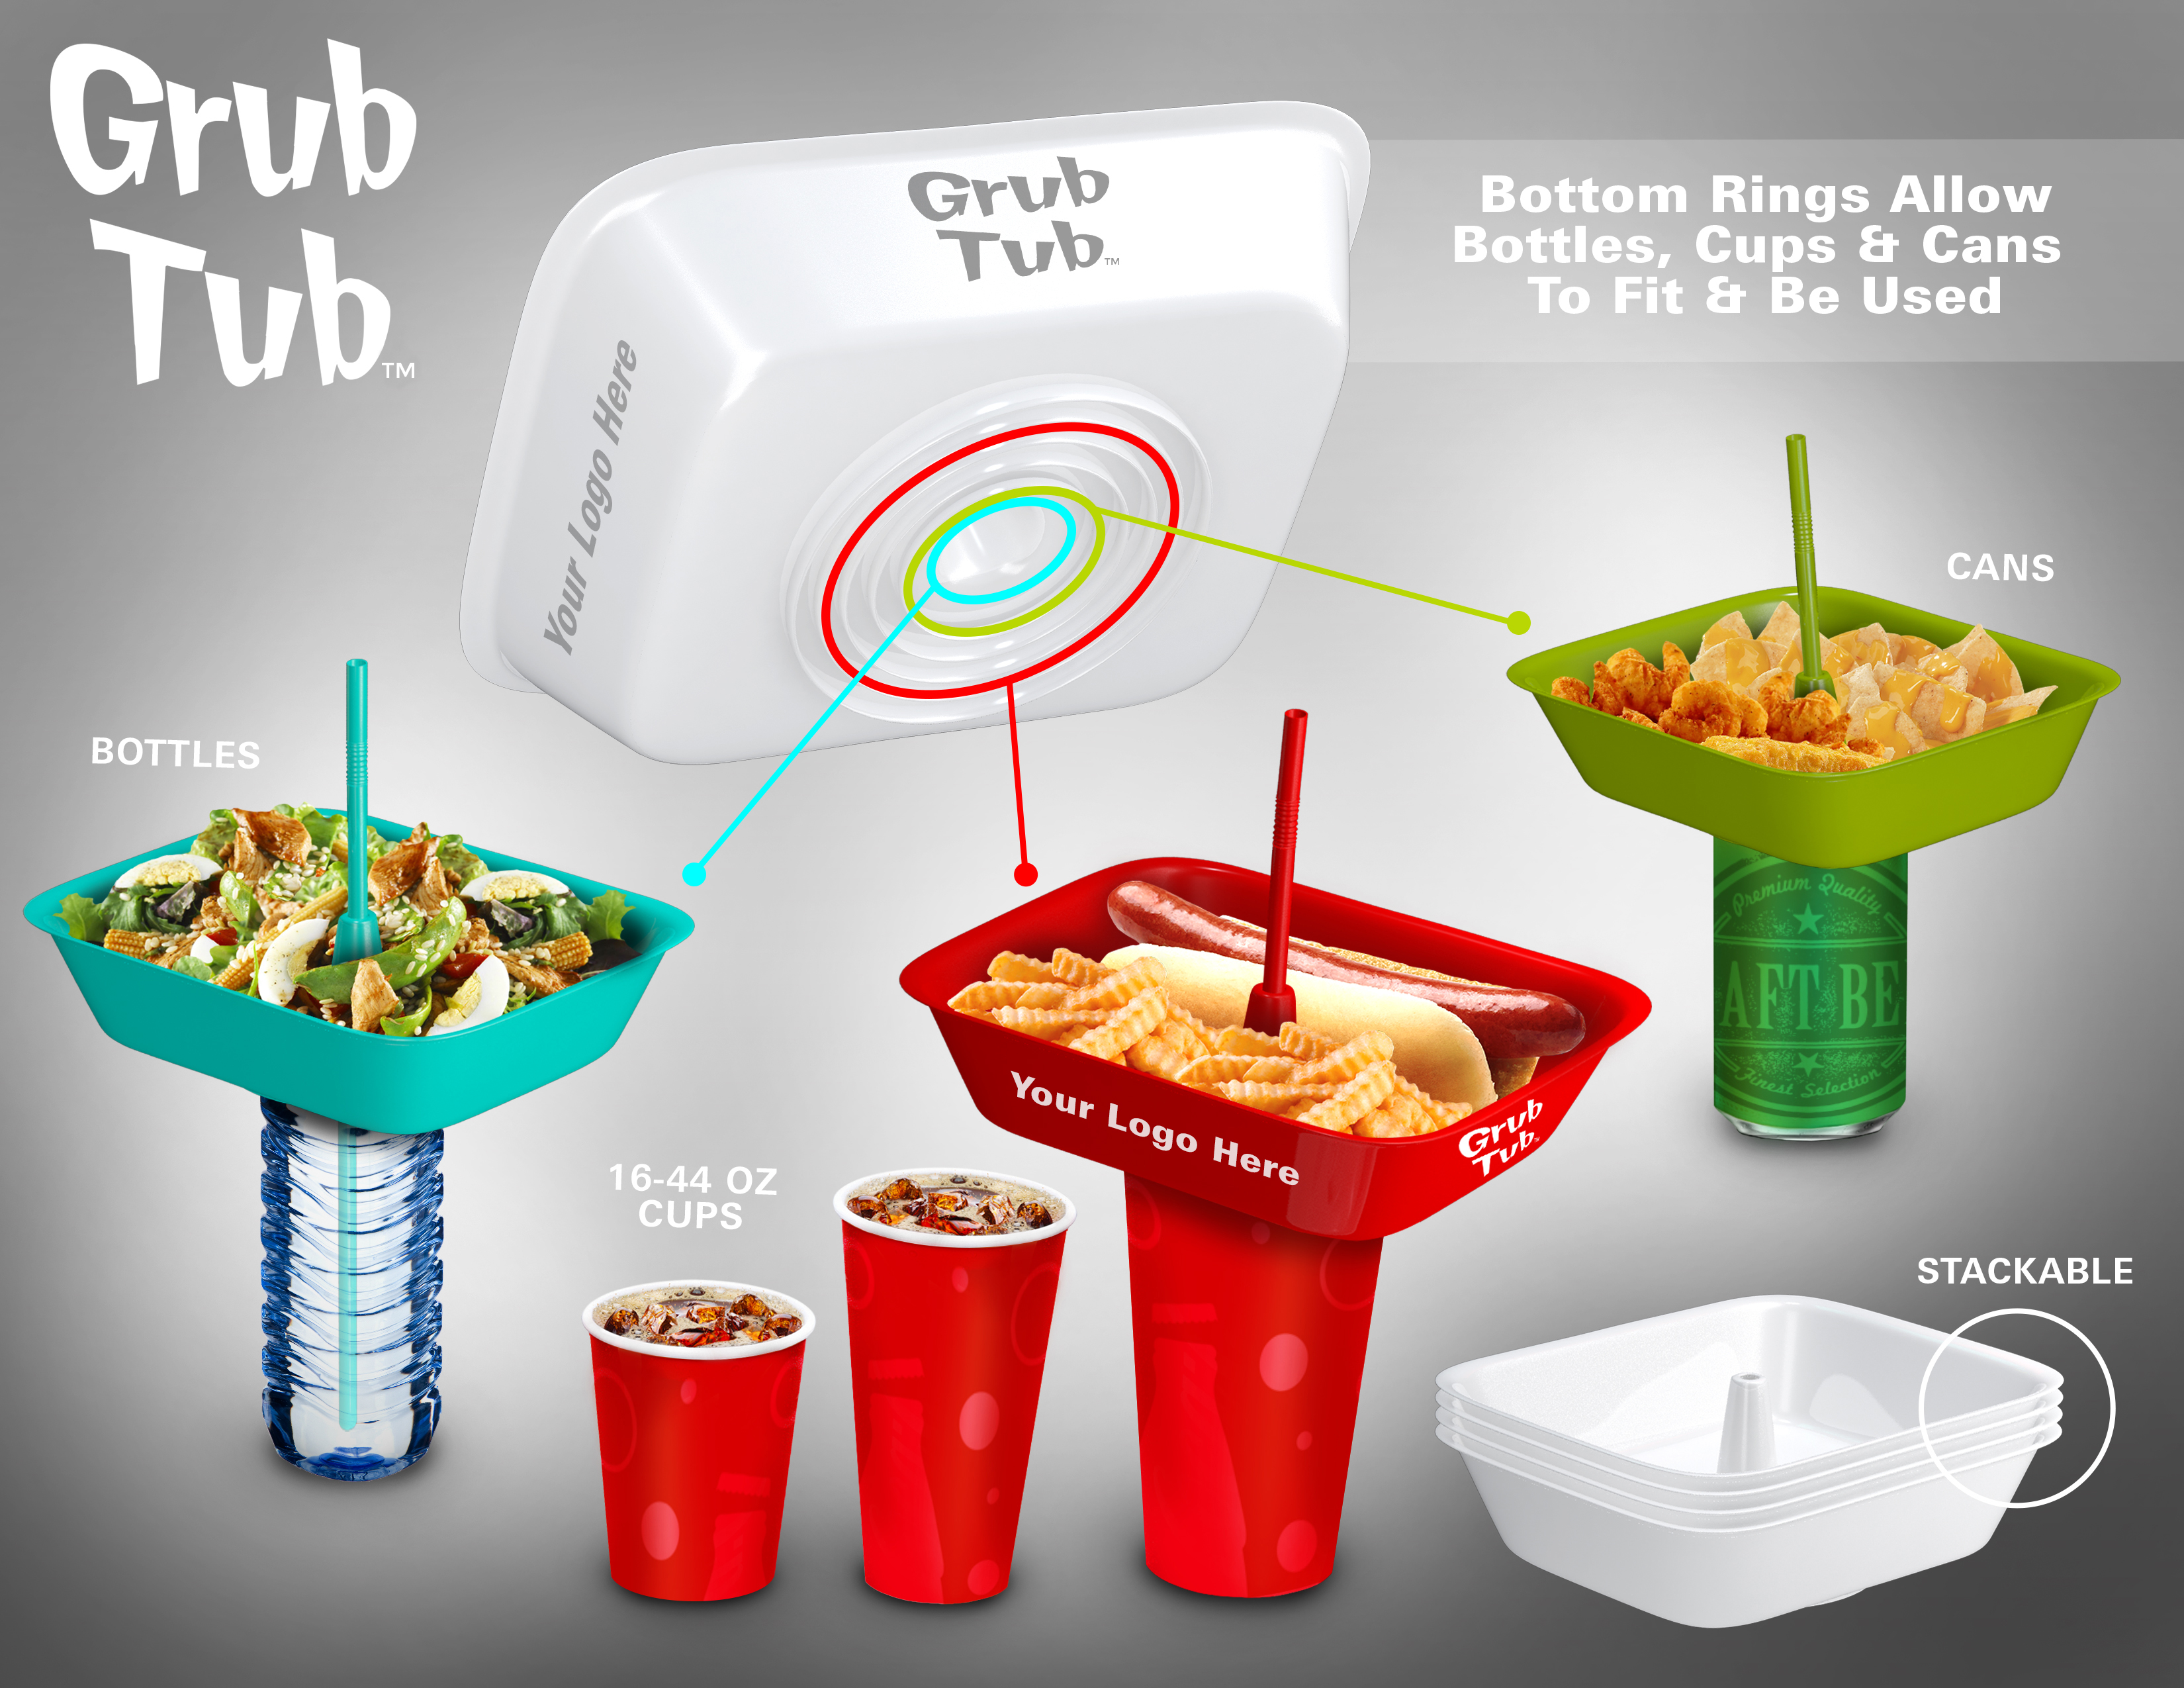 Grub Tub Fits on every standard sized cup, bottle and can